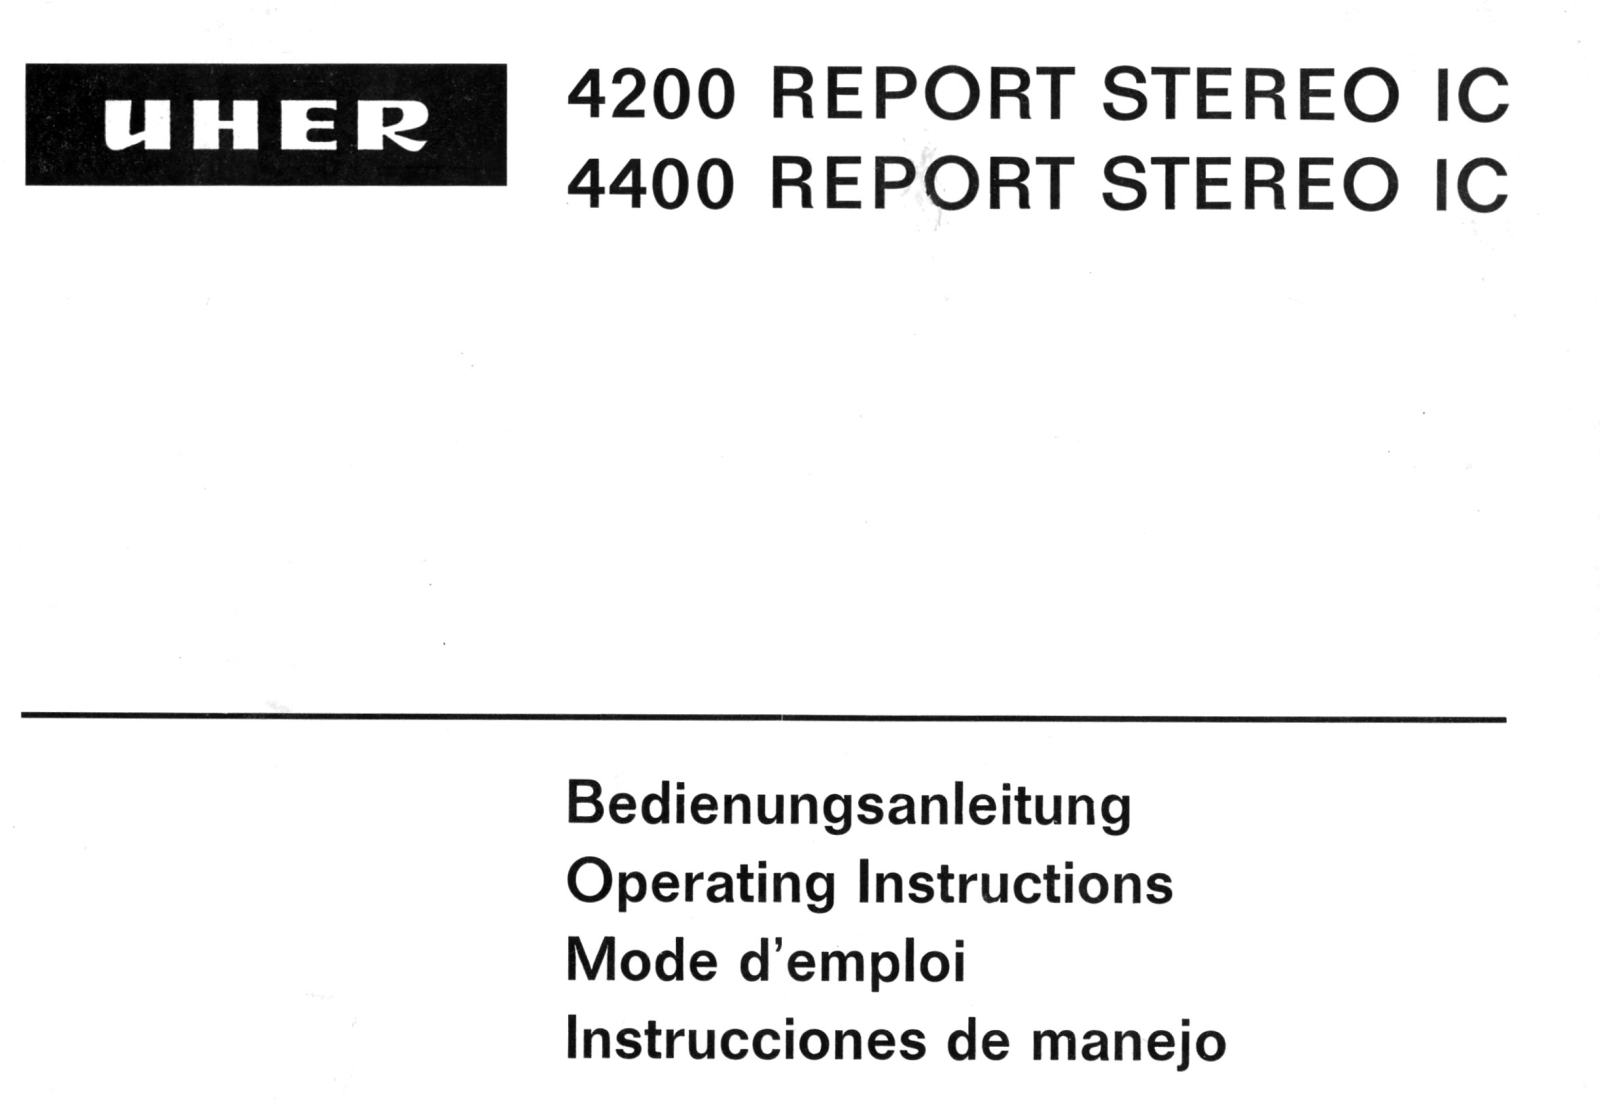 Betriebsanleitung/Operating Instructions für Uher 4400,4200 Report Stereo 